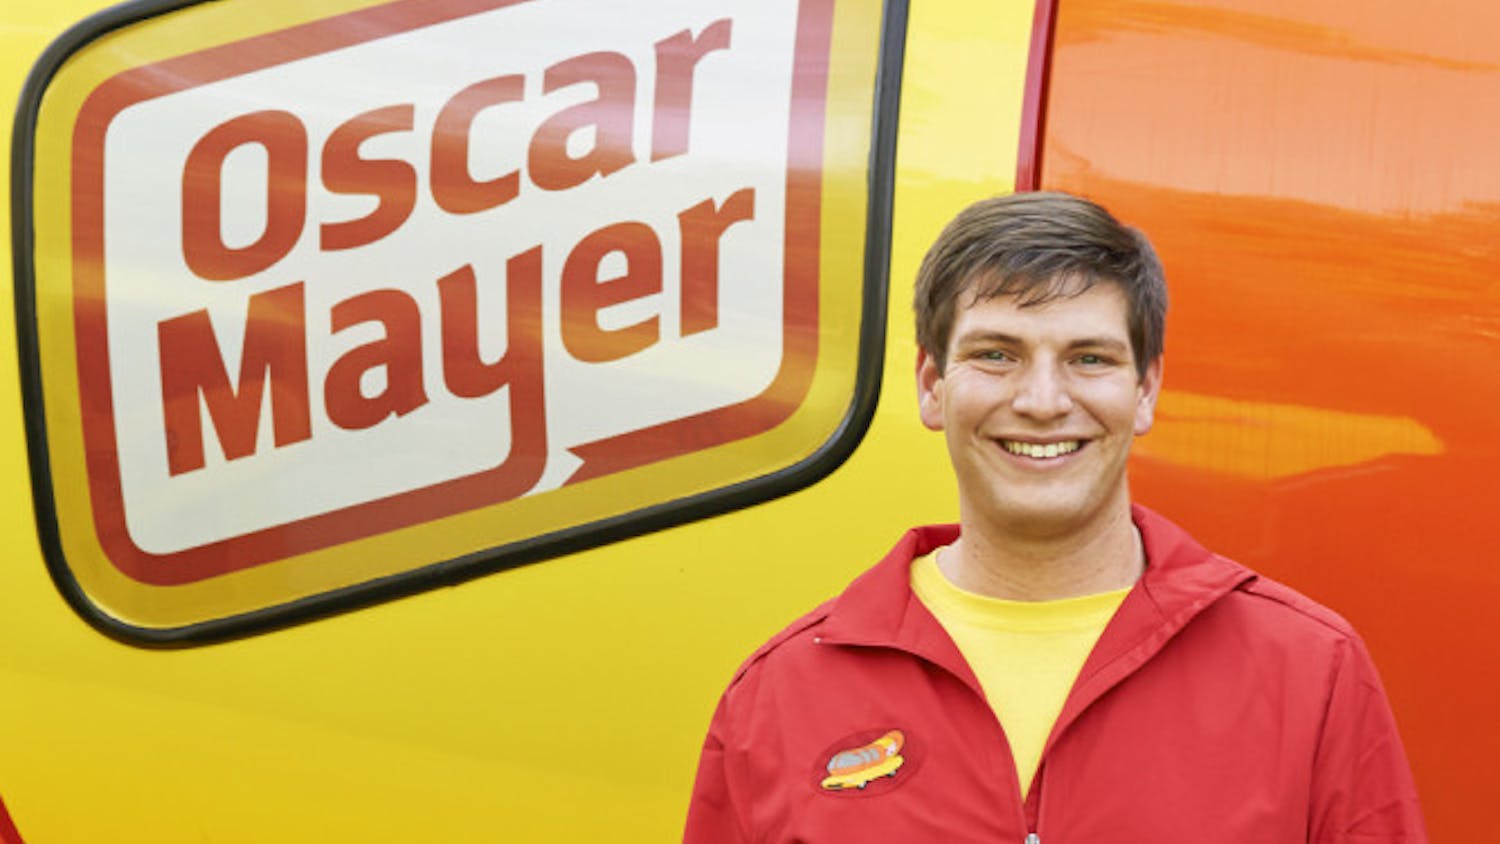 Spencer Smud, the 24-year-old “Hotdogger” who drives one of the Wienermobiles, poses for a photo in front of the hot dog-shaped vehicle.